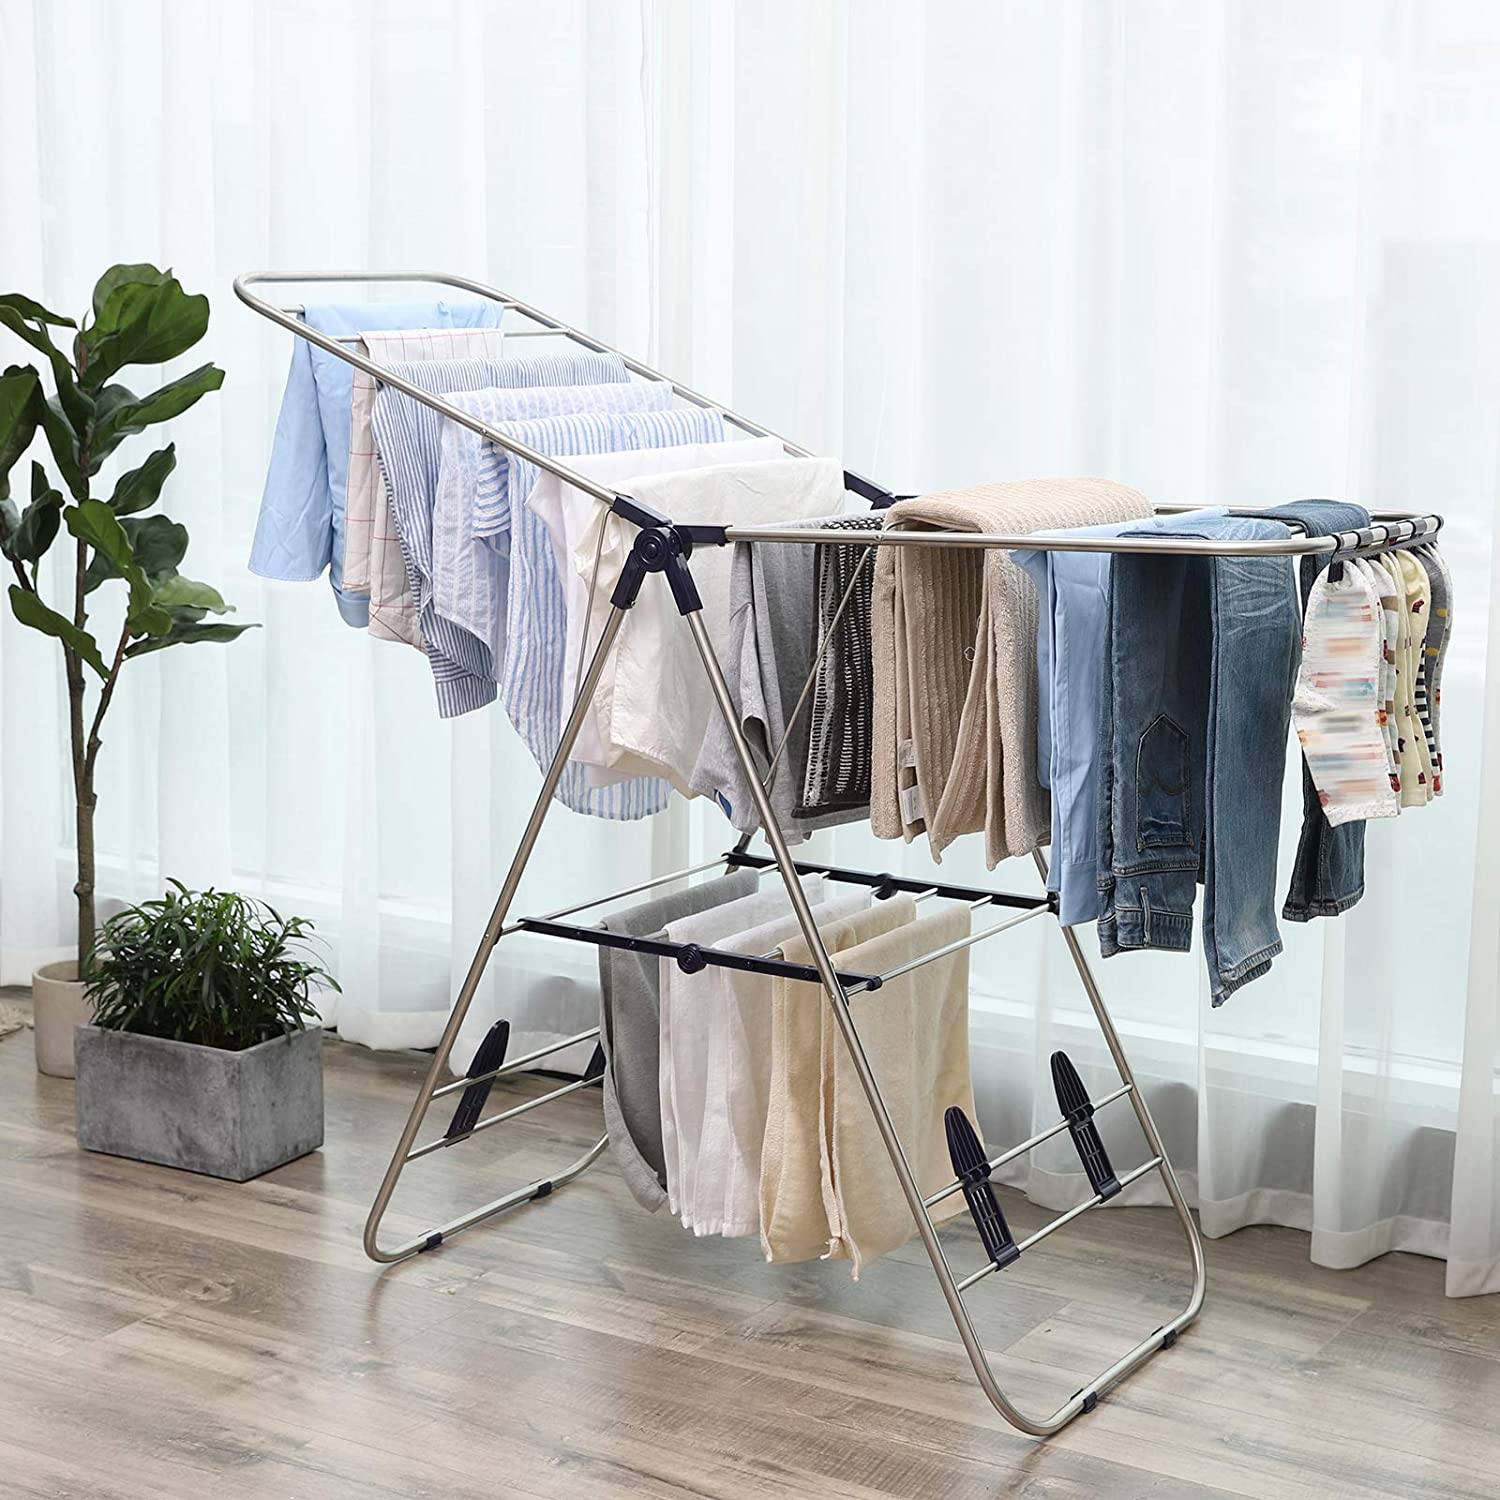 Winged Folding Clothes Airer, 16 Metre Drying Space, Laundry Drying Rack, Multifunctional Air Dryer, Stainless Steel Tubes Silver LLR502 RAW58.dk 